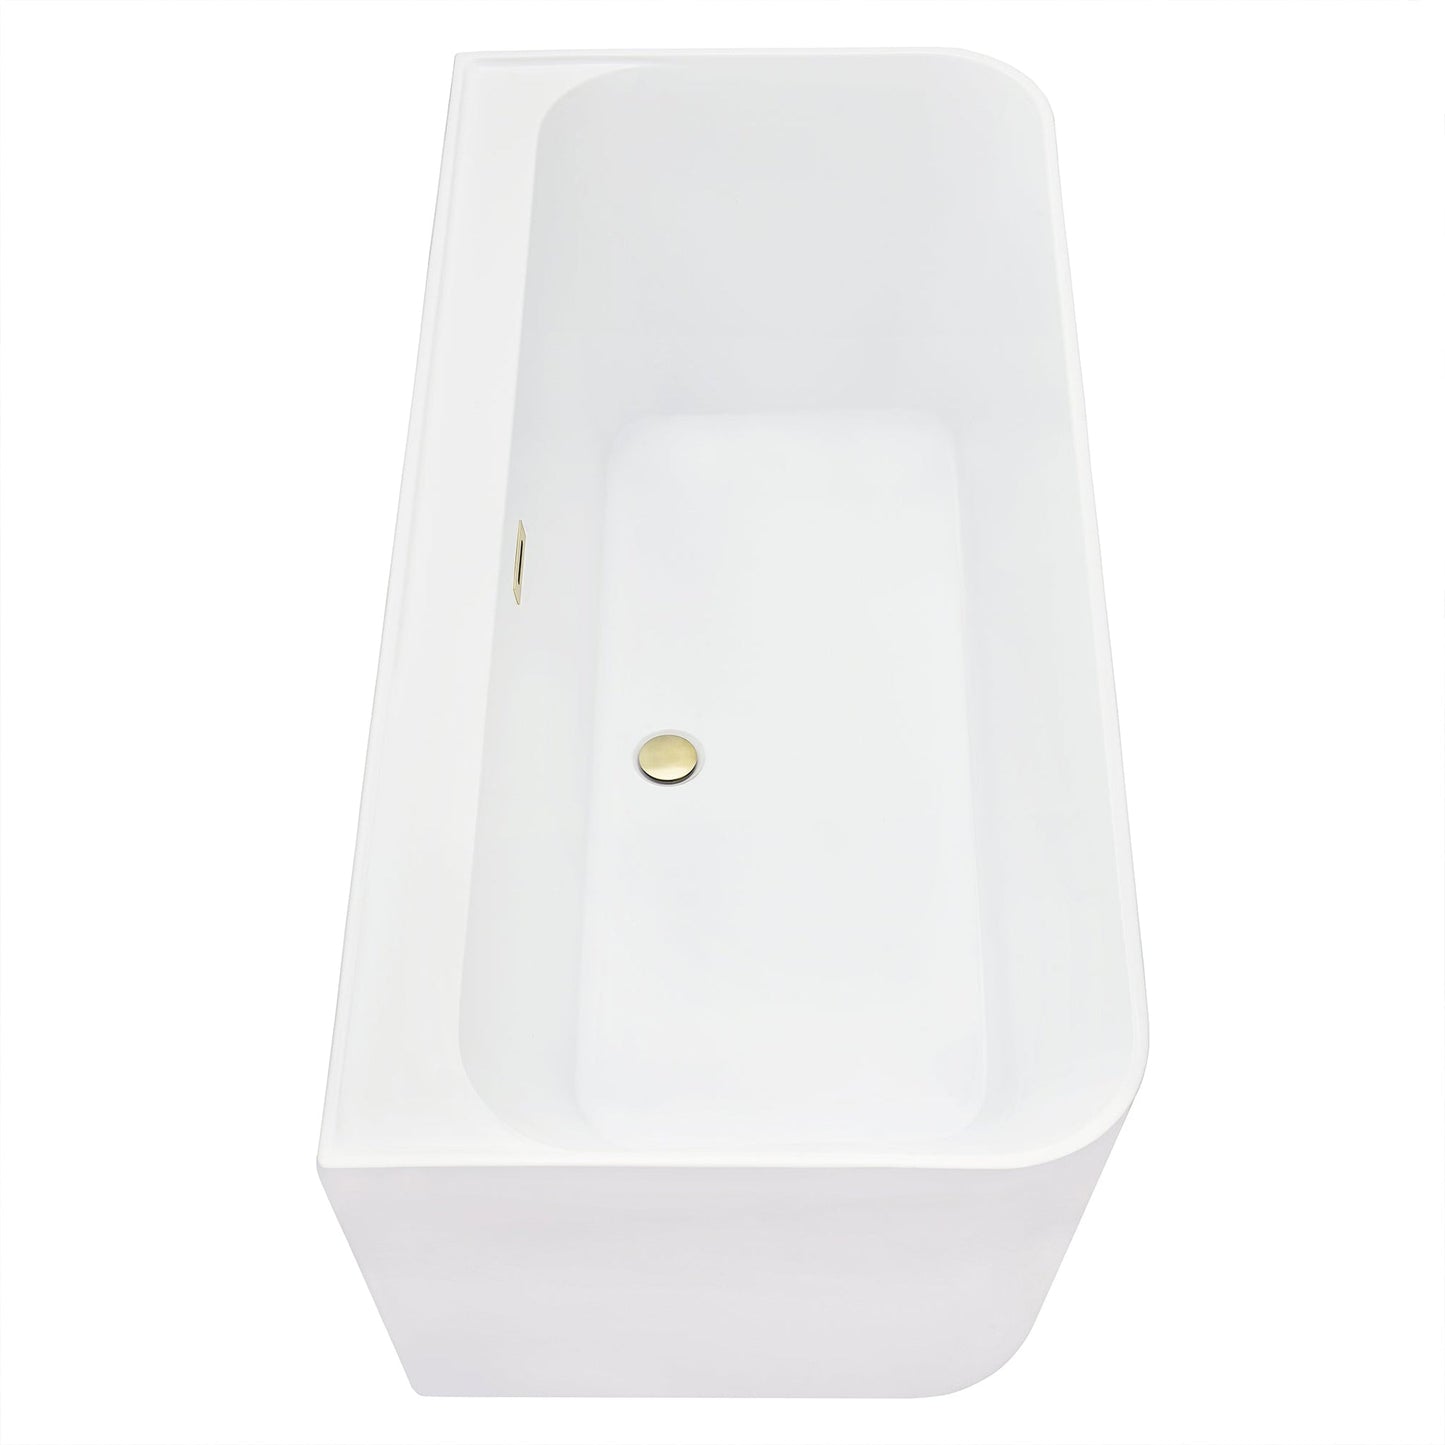 Altair Groda 63" x 30" White Acrylic Freestanding Bathtub With Brushed Gold Drain and Overflow